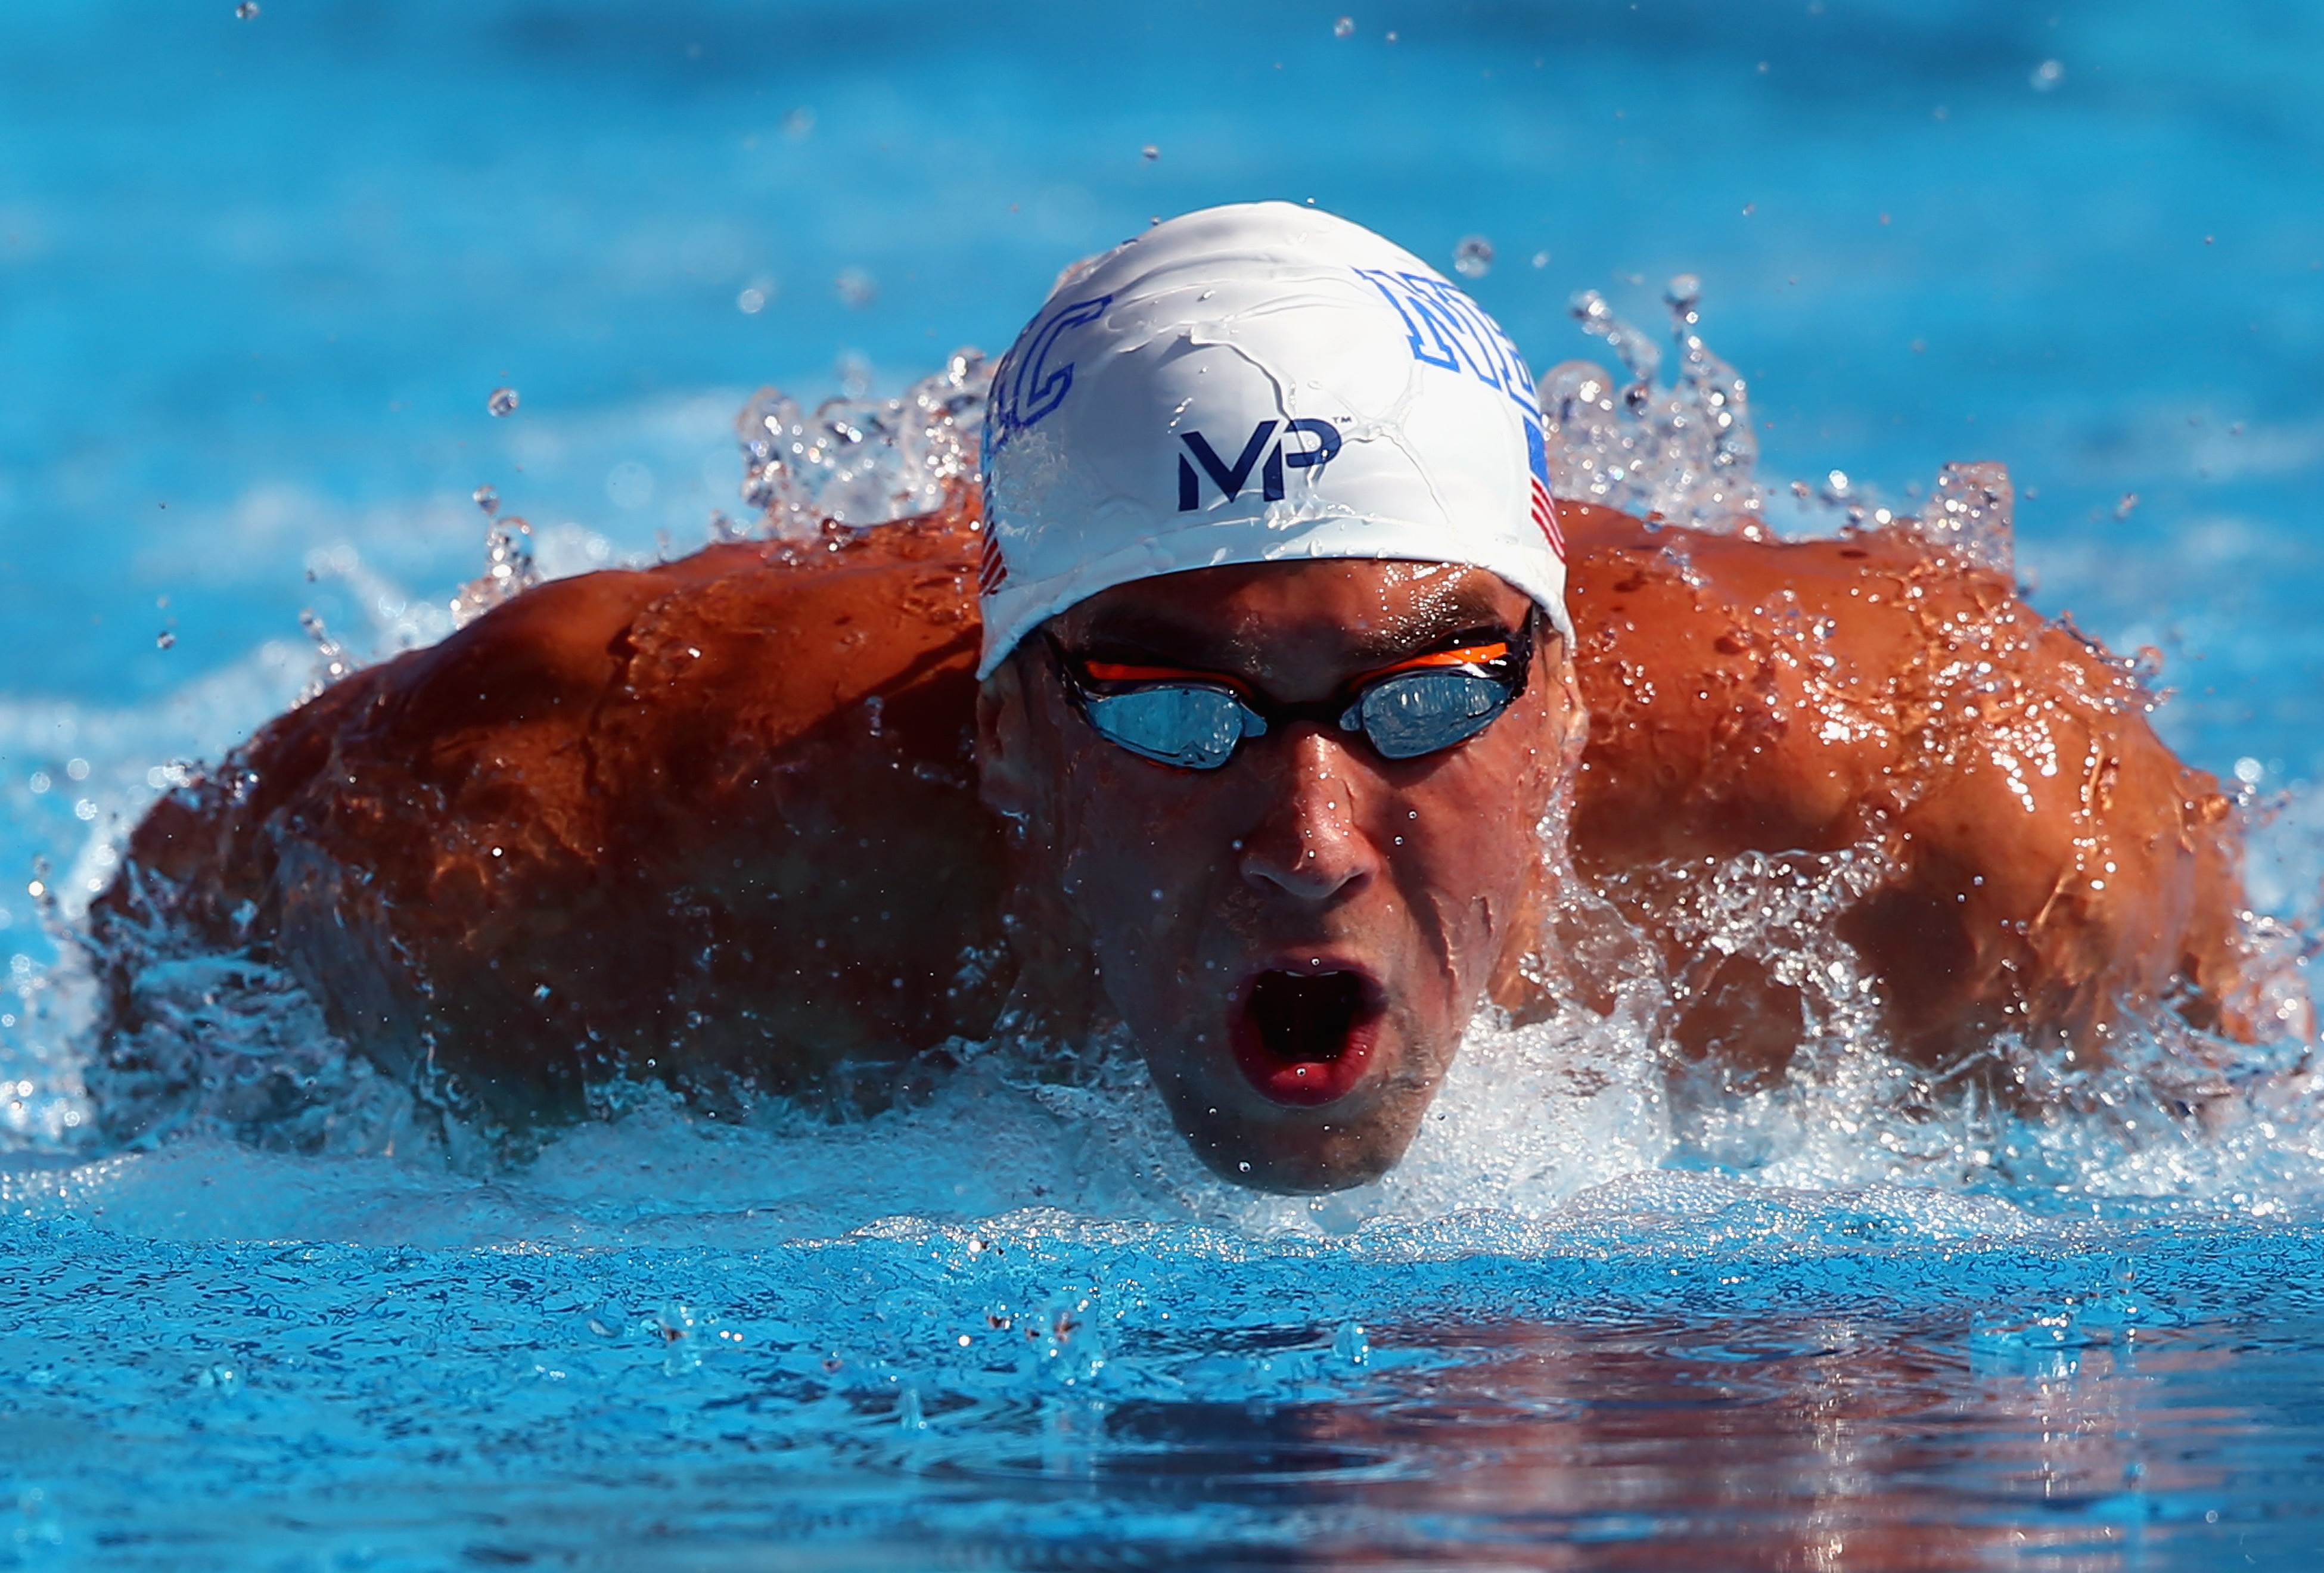 Michael Phelps competes in the Men's 200 LC Meter IM prelim during the 2015 Phillips 66 National Championships at the Northside Swim Center on August 9, 2015 in San Antonio, Texas. Photo: AFP